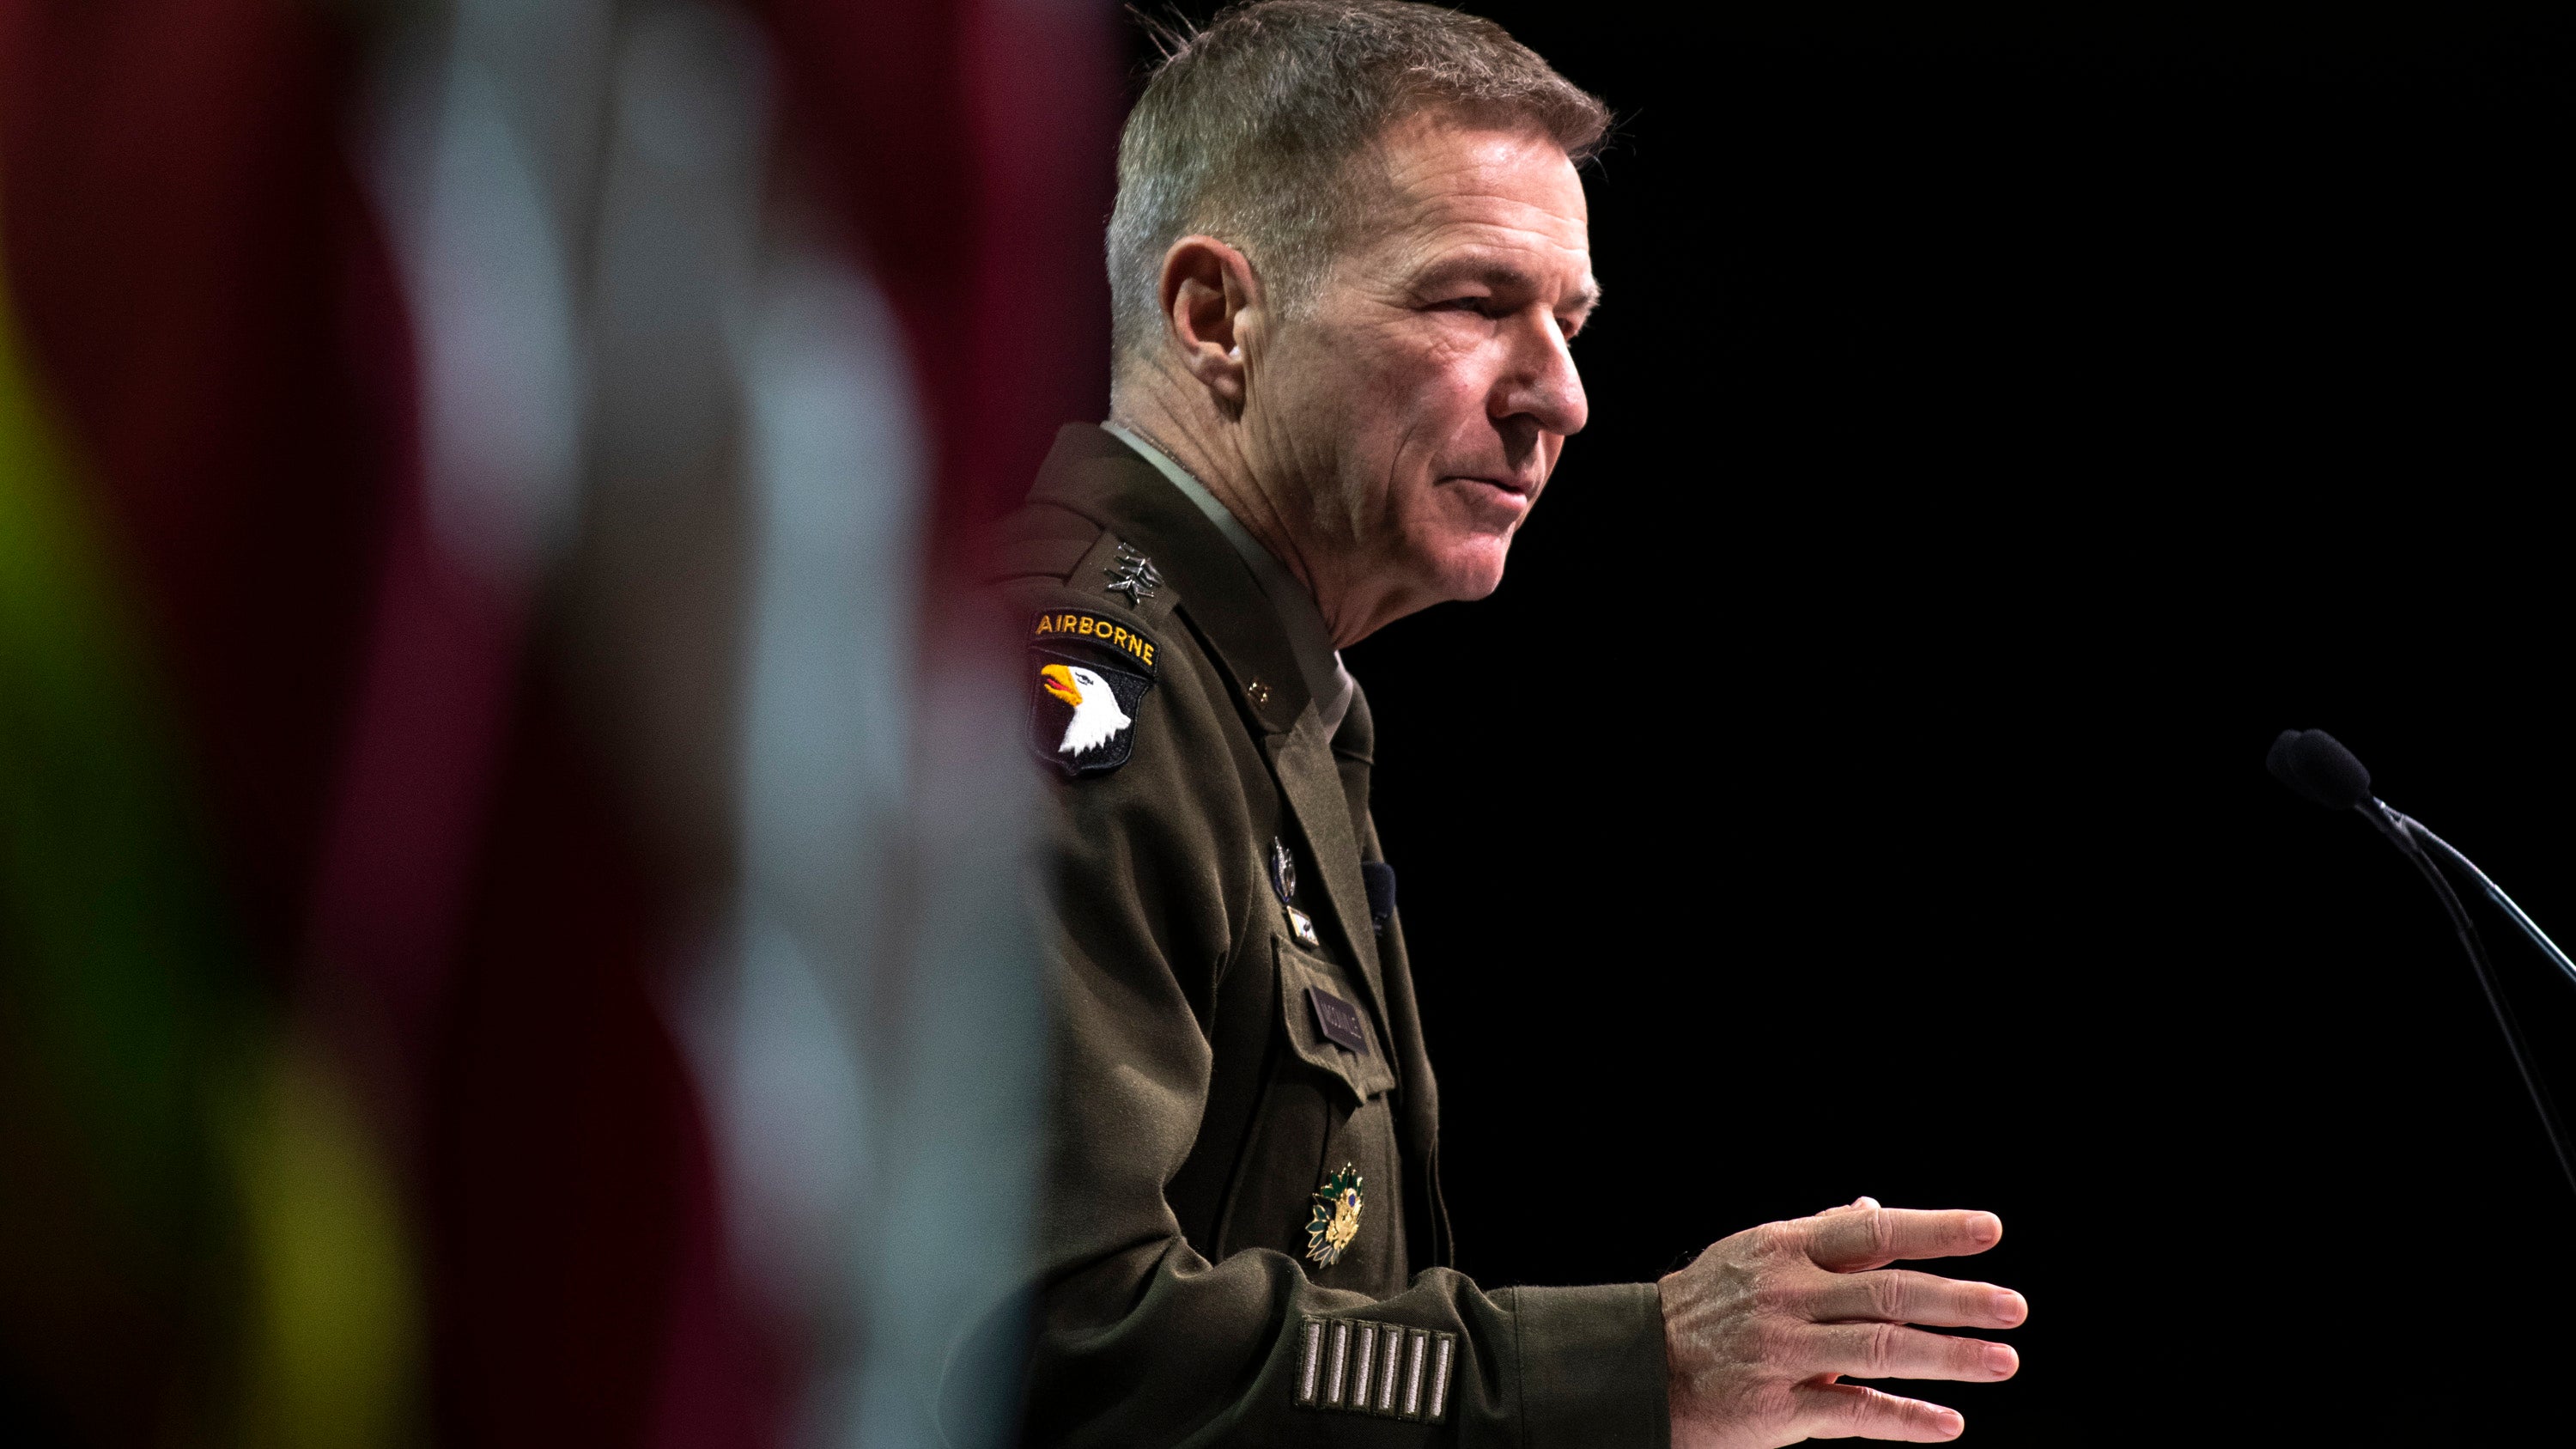 Chief of Staff of the Army Gen. James McConville speaks during the Eisenhower Luncheon at AUSA 2022 Annual Meeting in Washington, D.C., Tuesday, Oct. 11, 2022.  (Carol Guzy for AUSA)